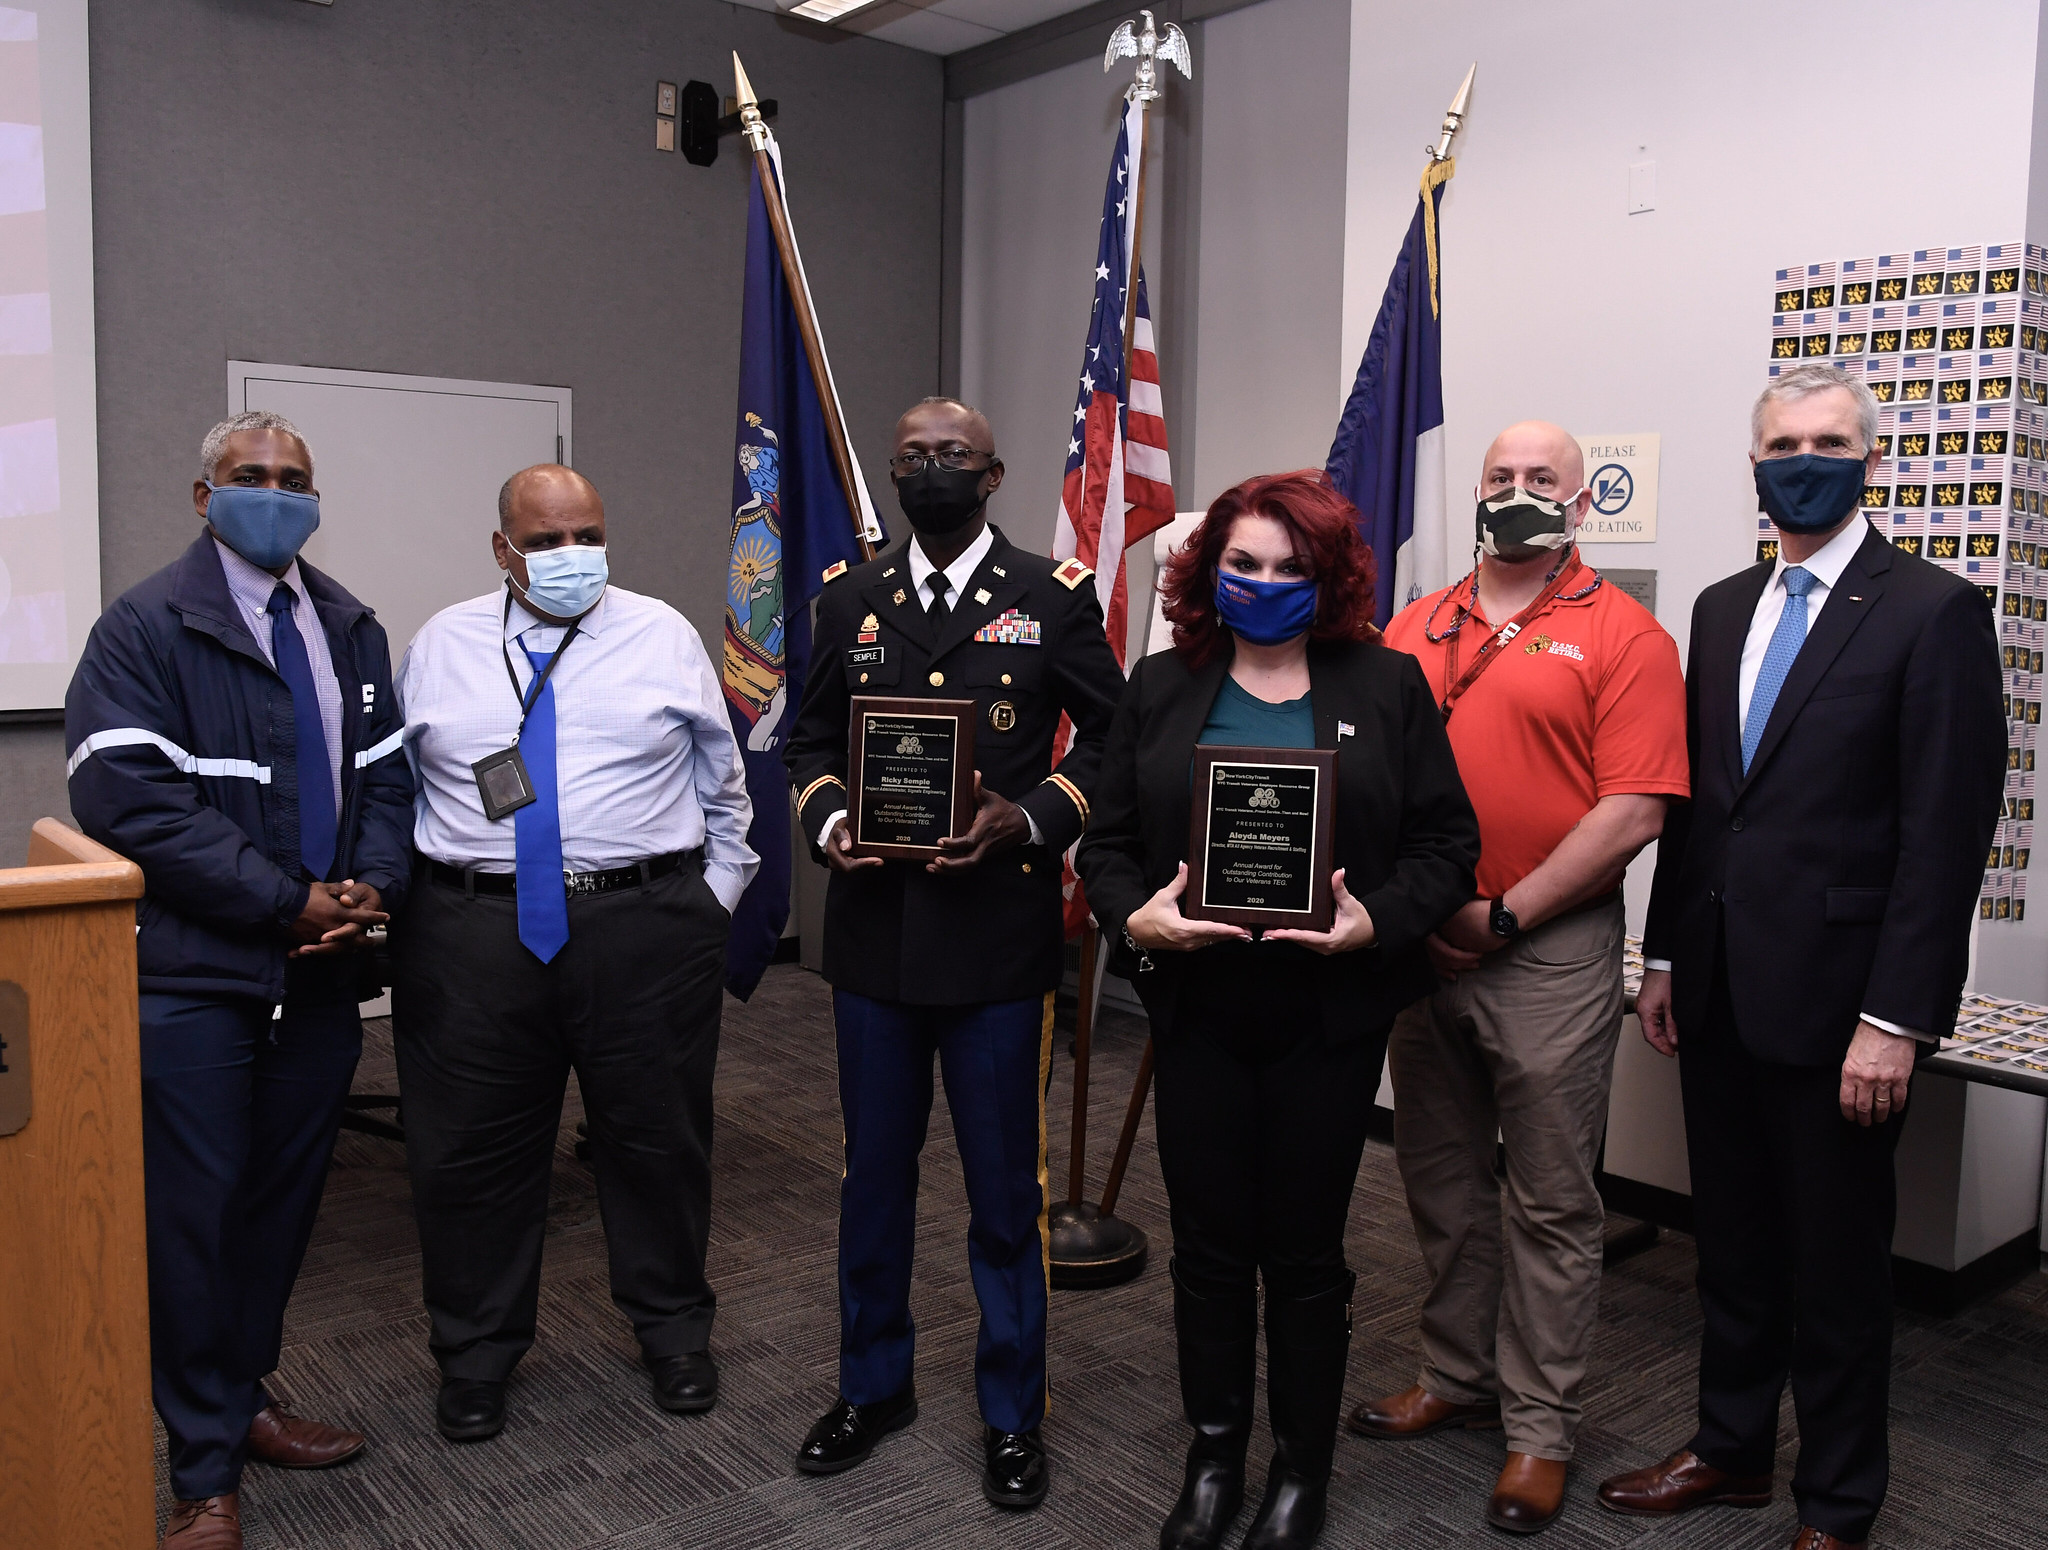 mta honors employees who served in the u.s. military